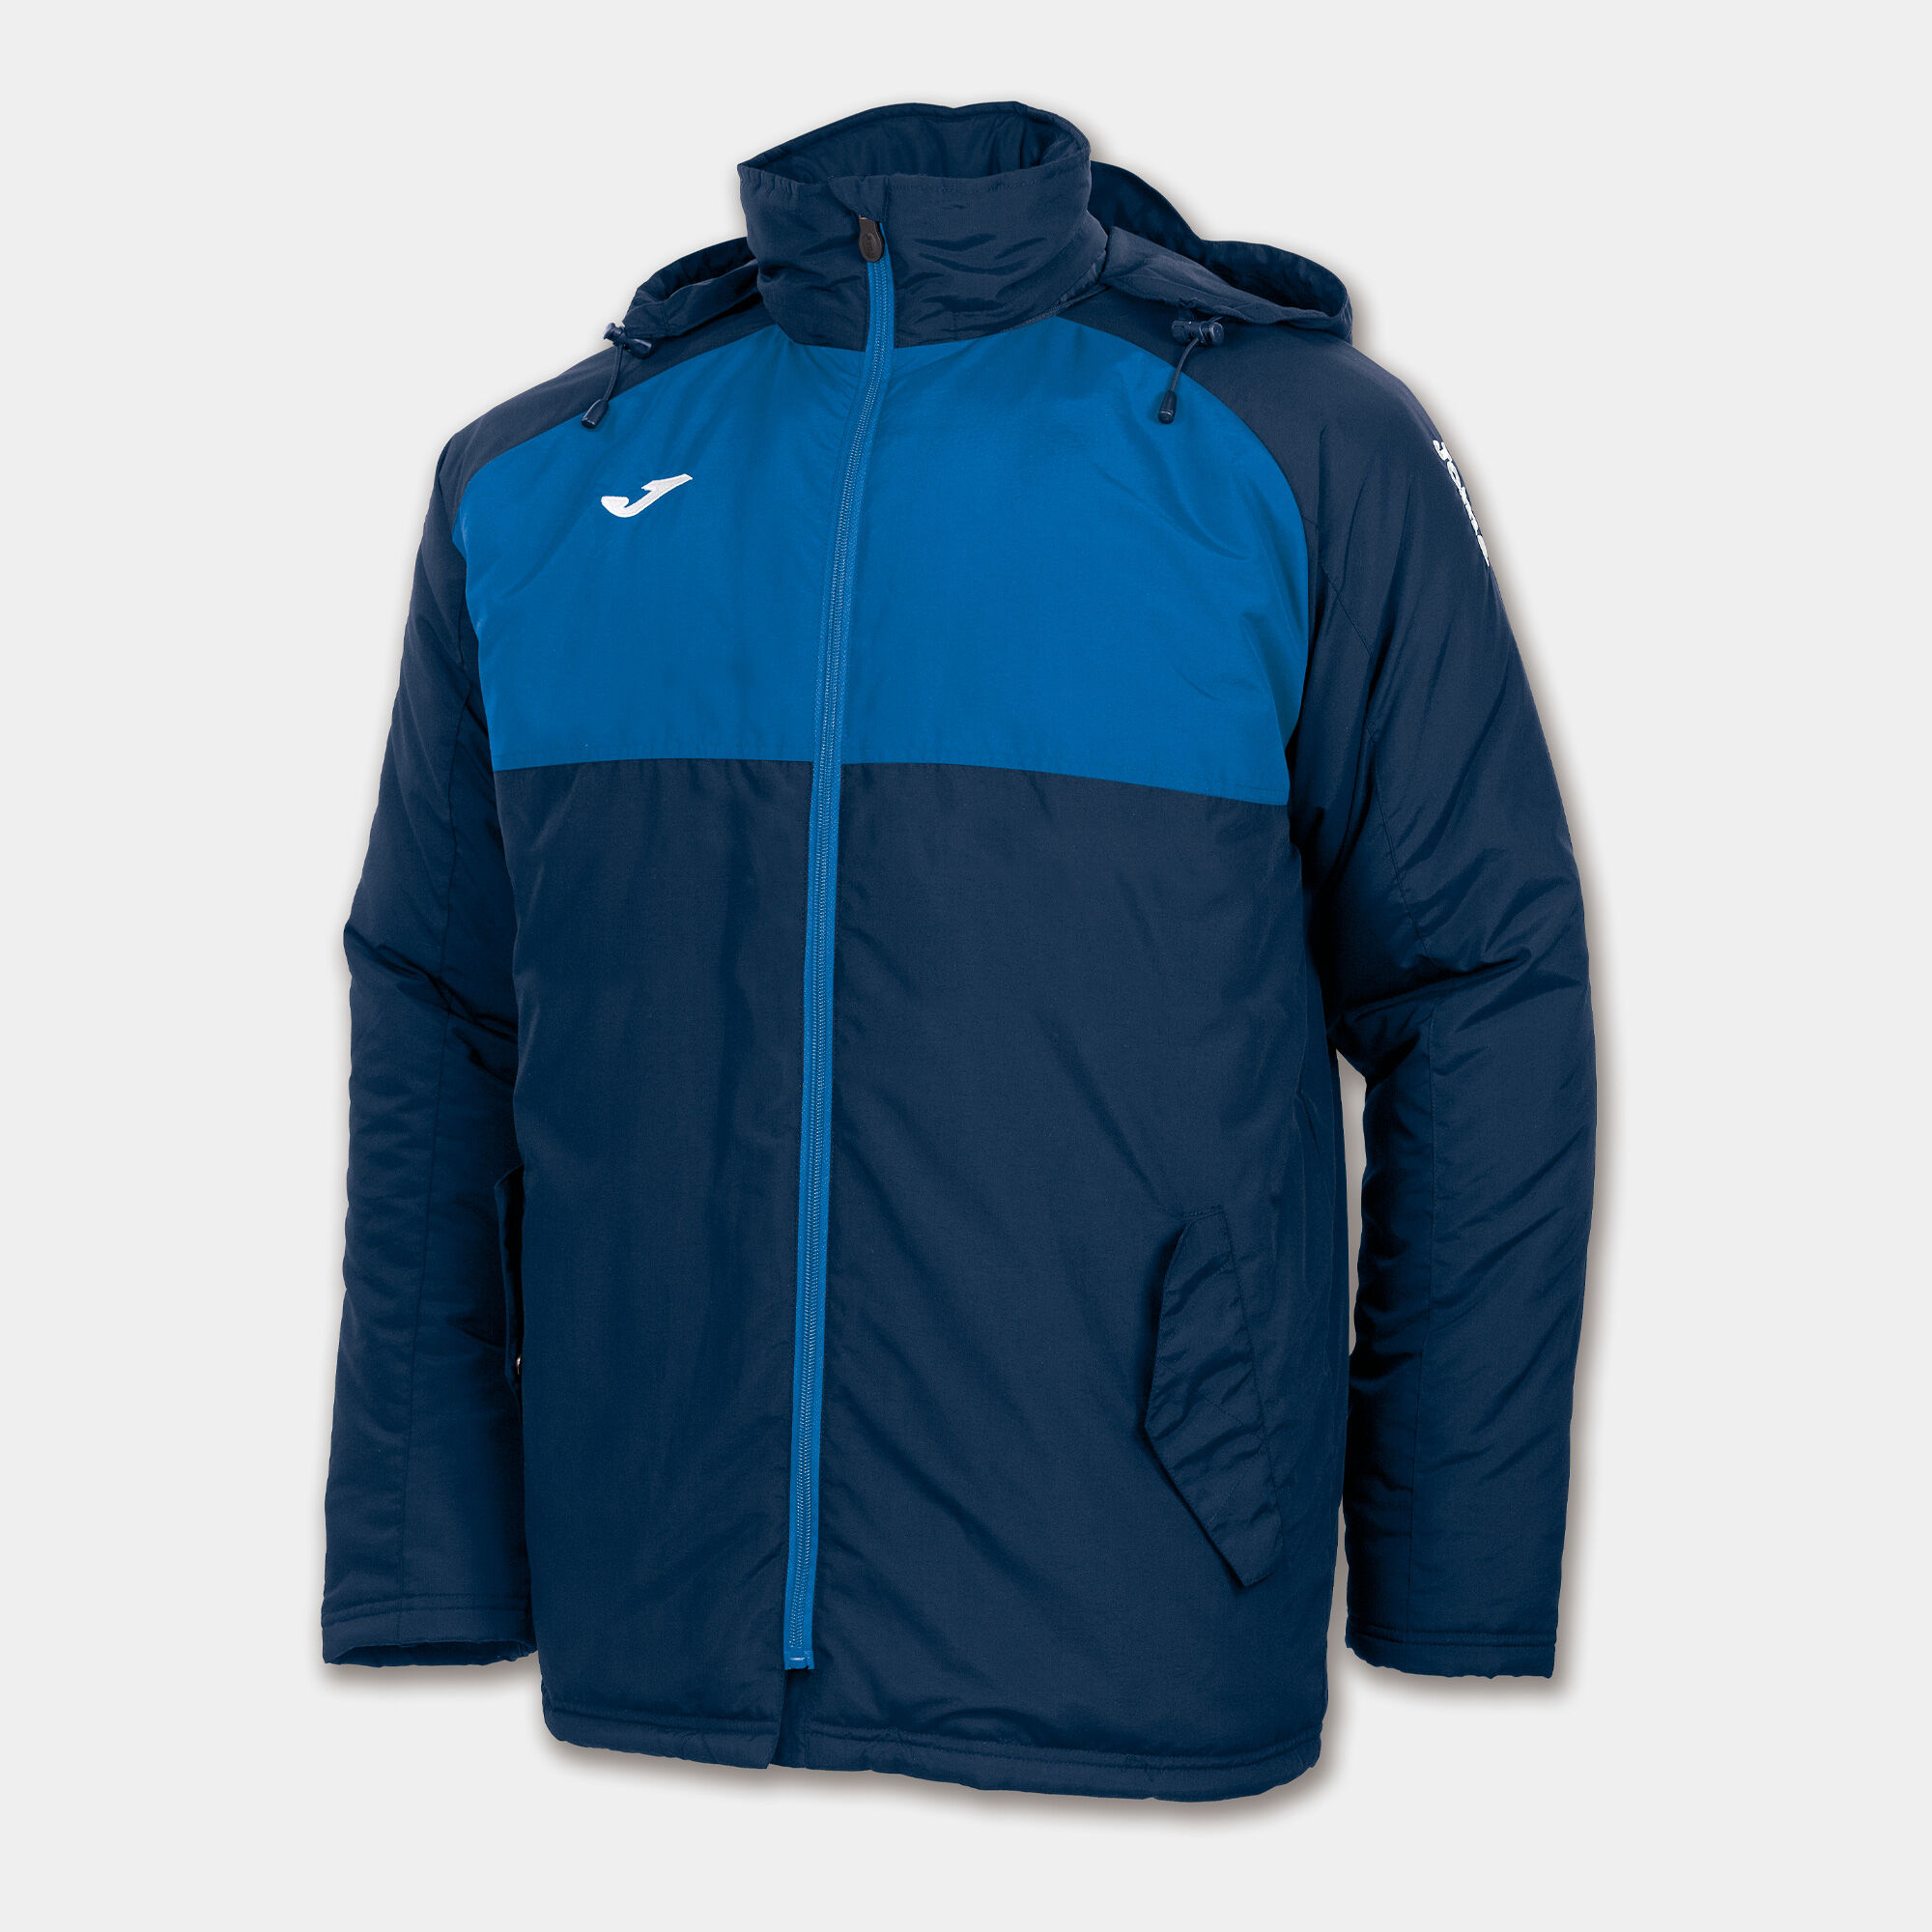 ANORAK MAN ANDES NAVY BLUE ROYAL BLUE